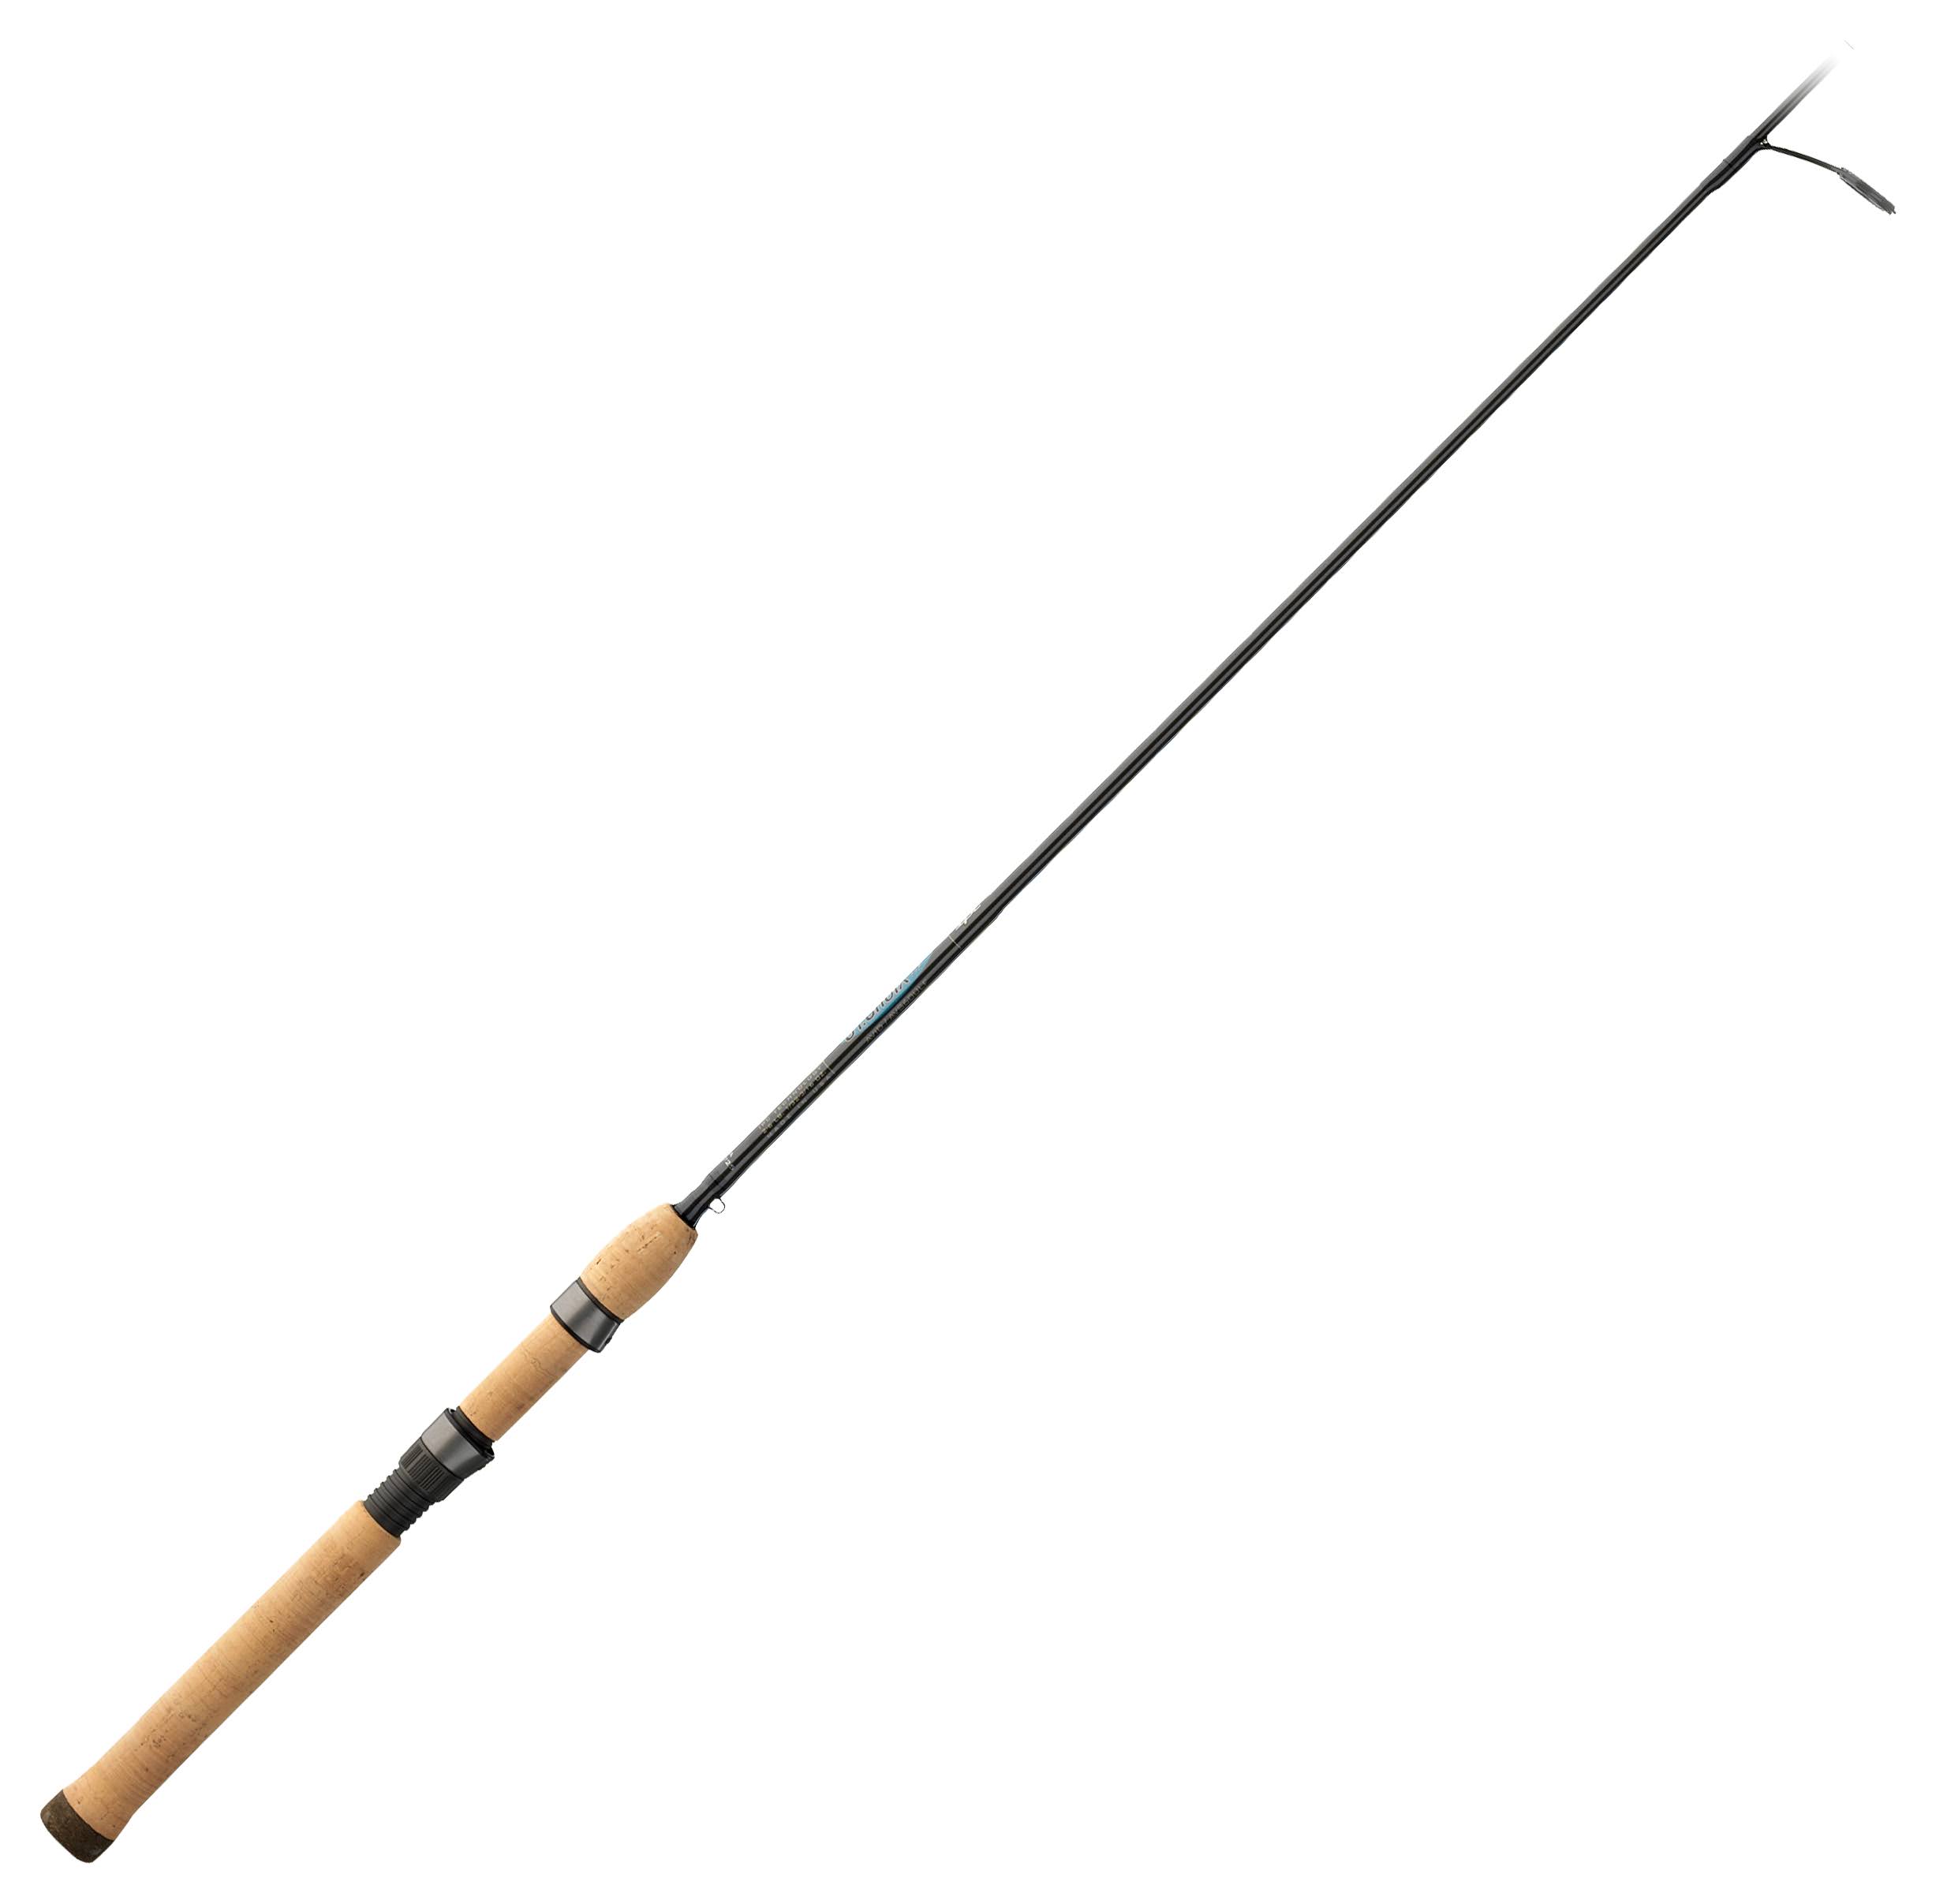 ST Croix Avid Series Spinning & Casting Rods